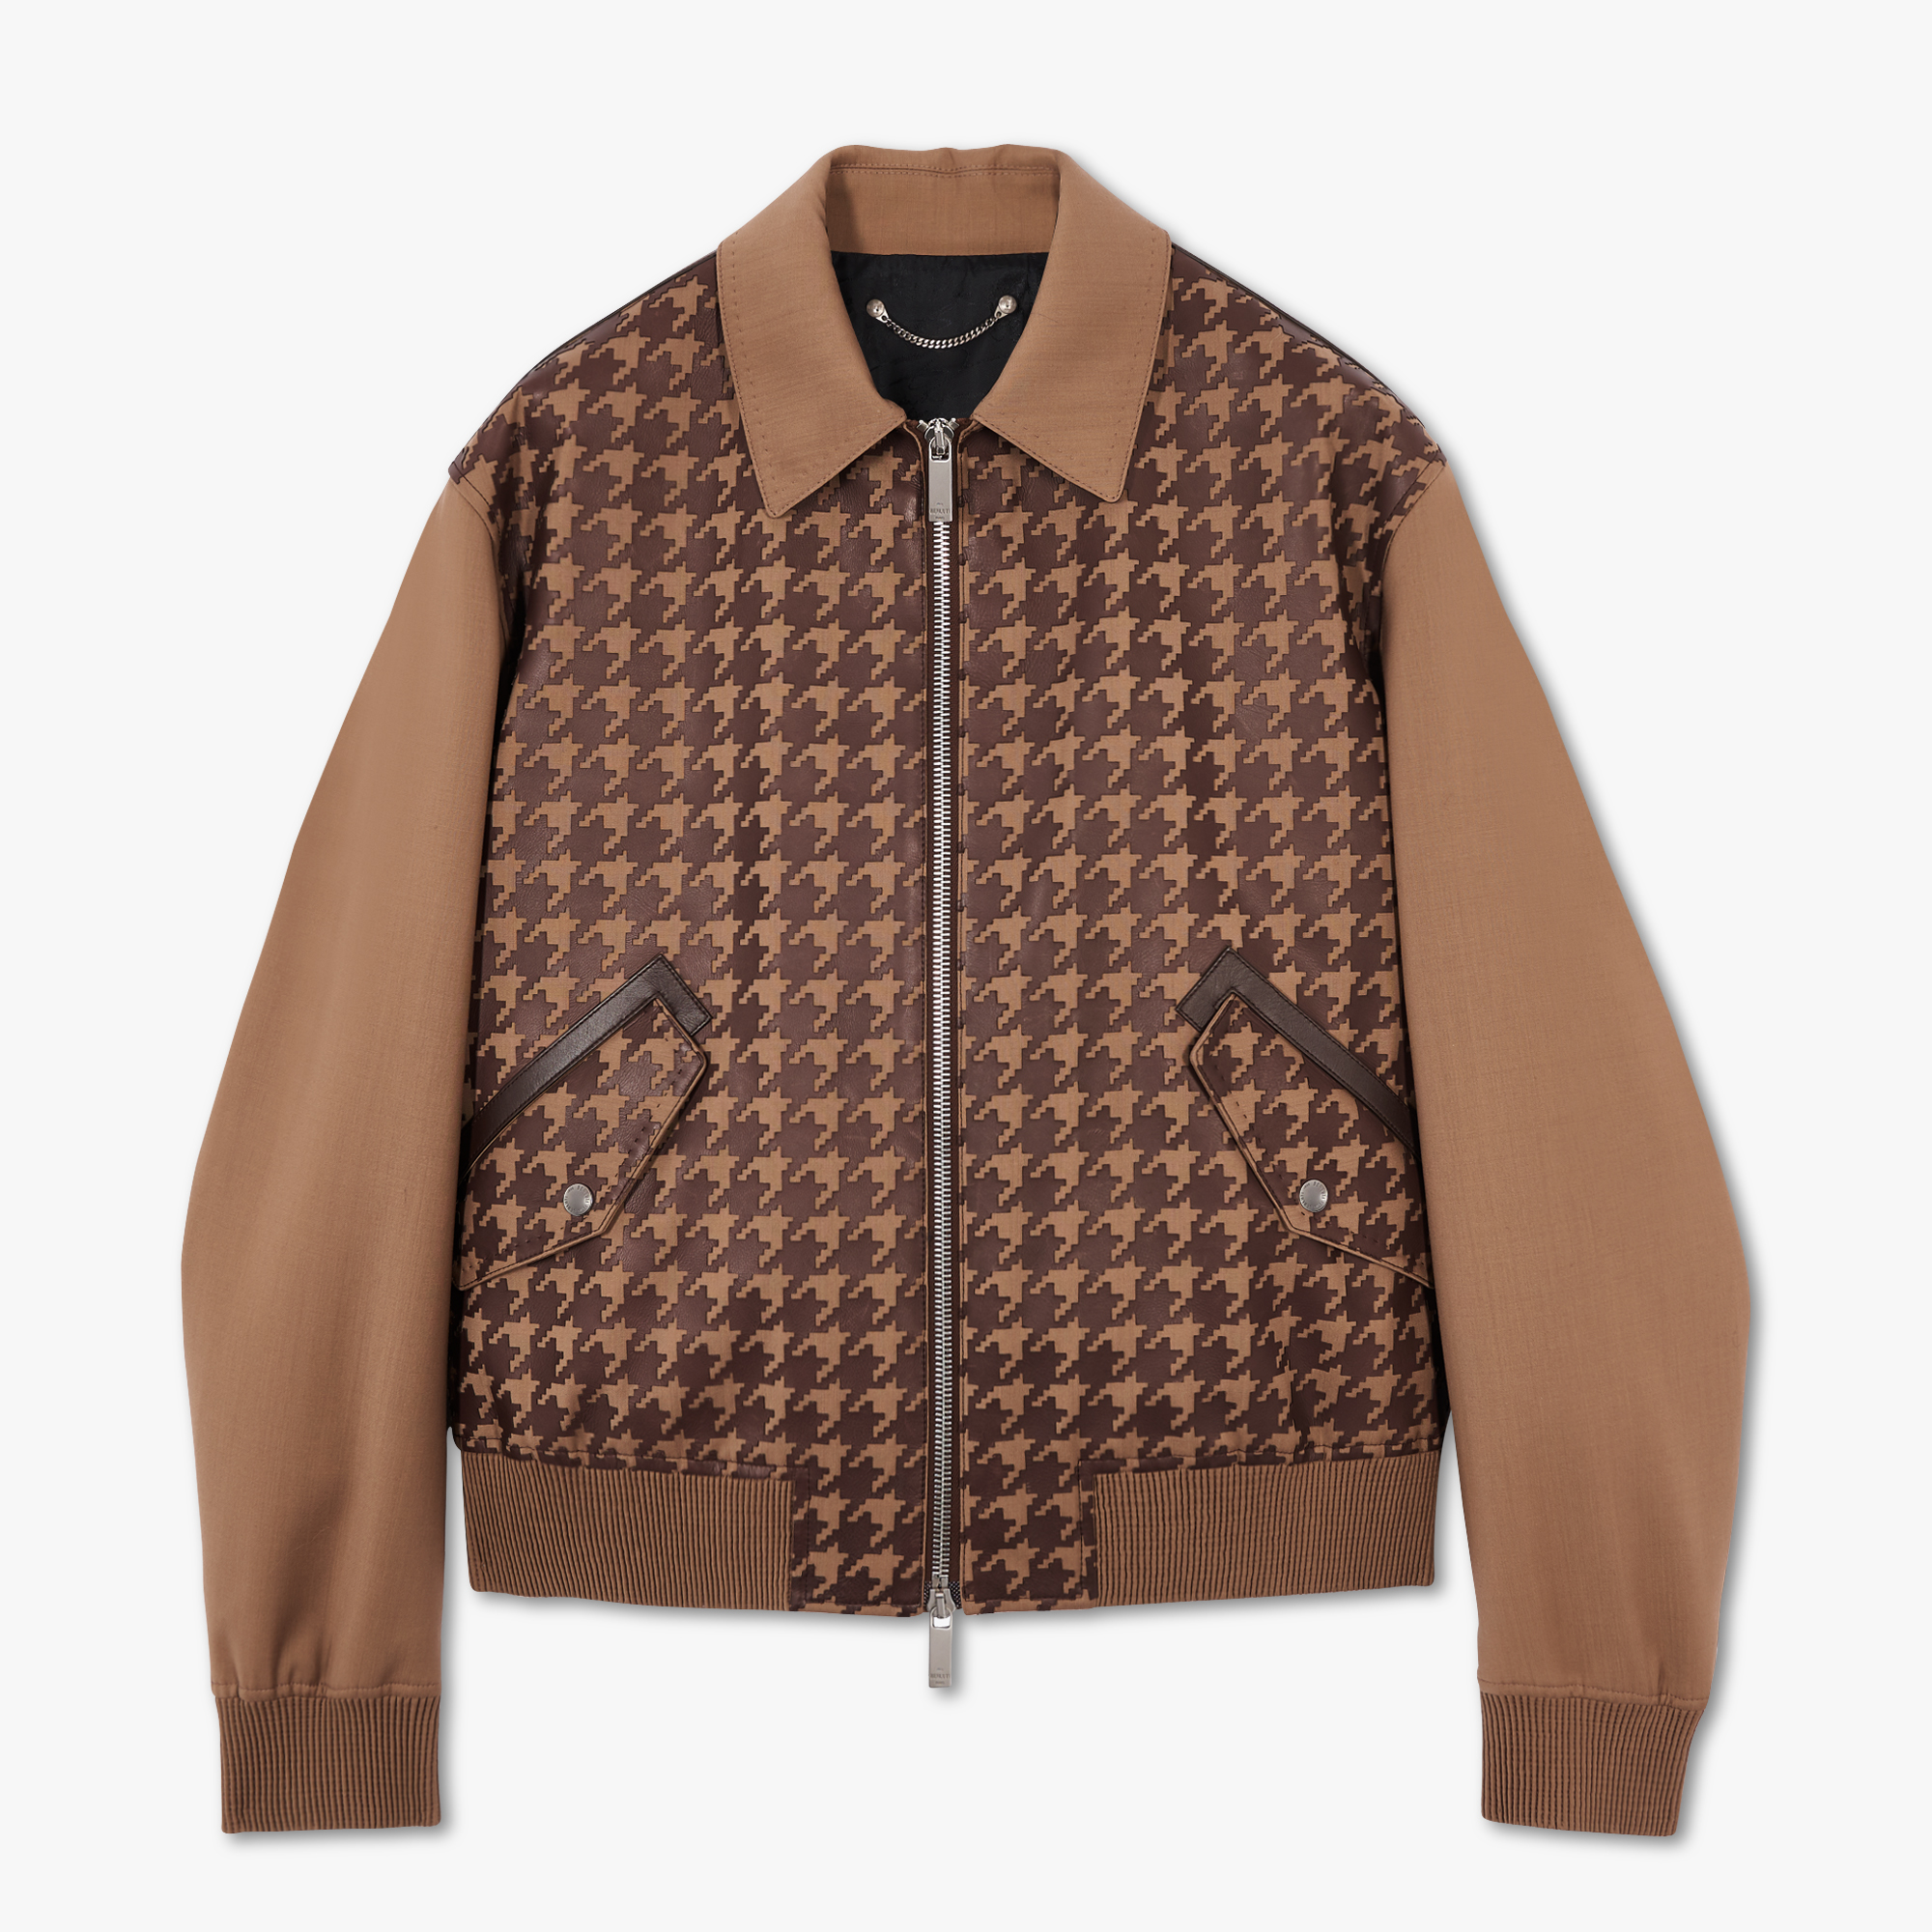 Wool Blouson With Houndstooth Leather Pattern, RIVERSTONE, hi-res